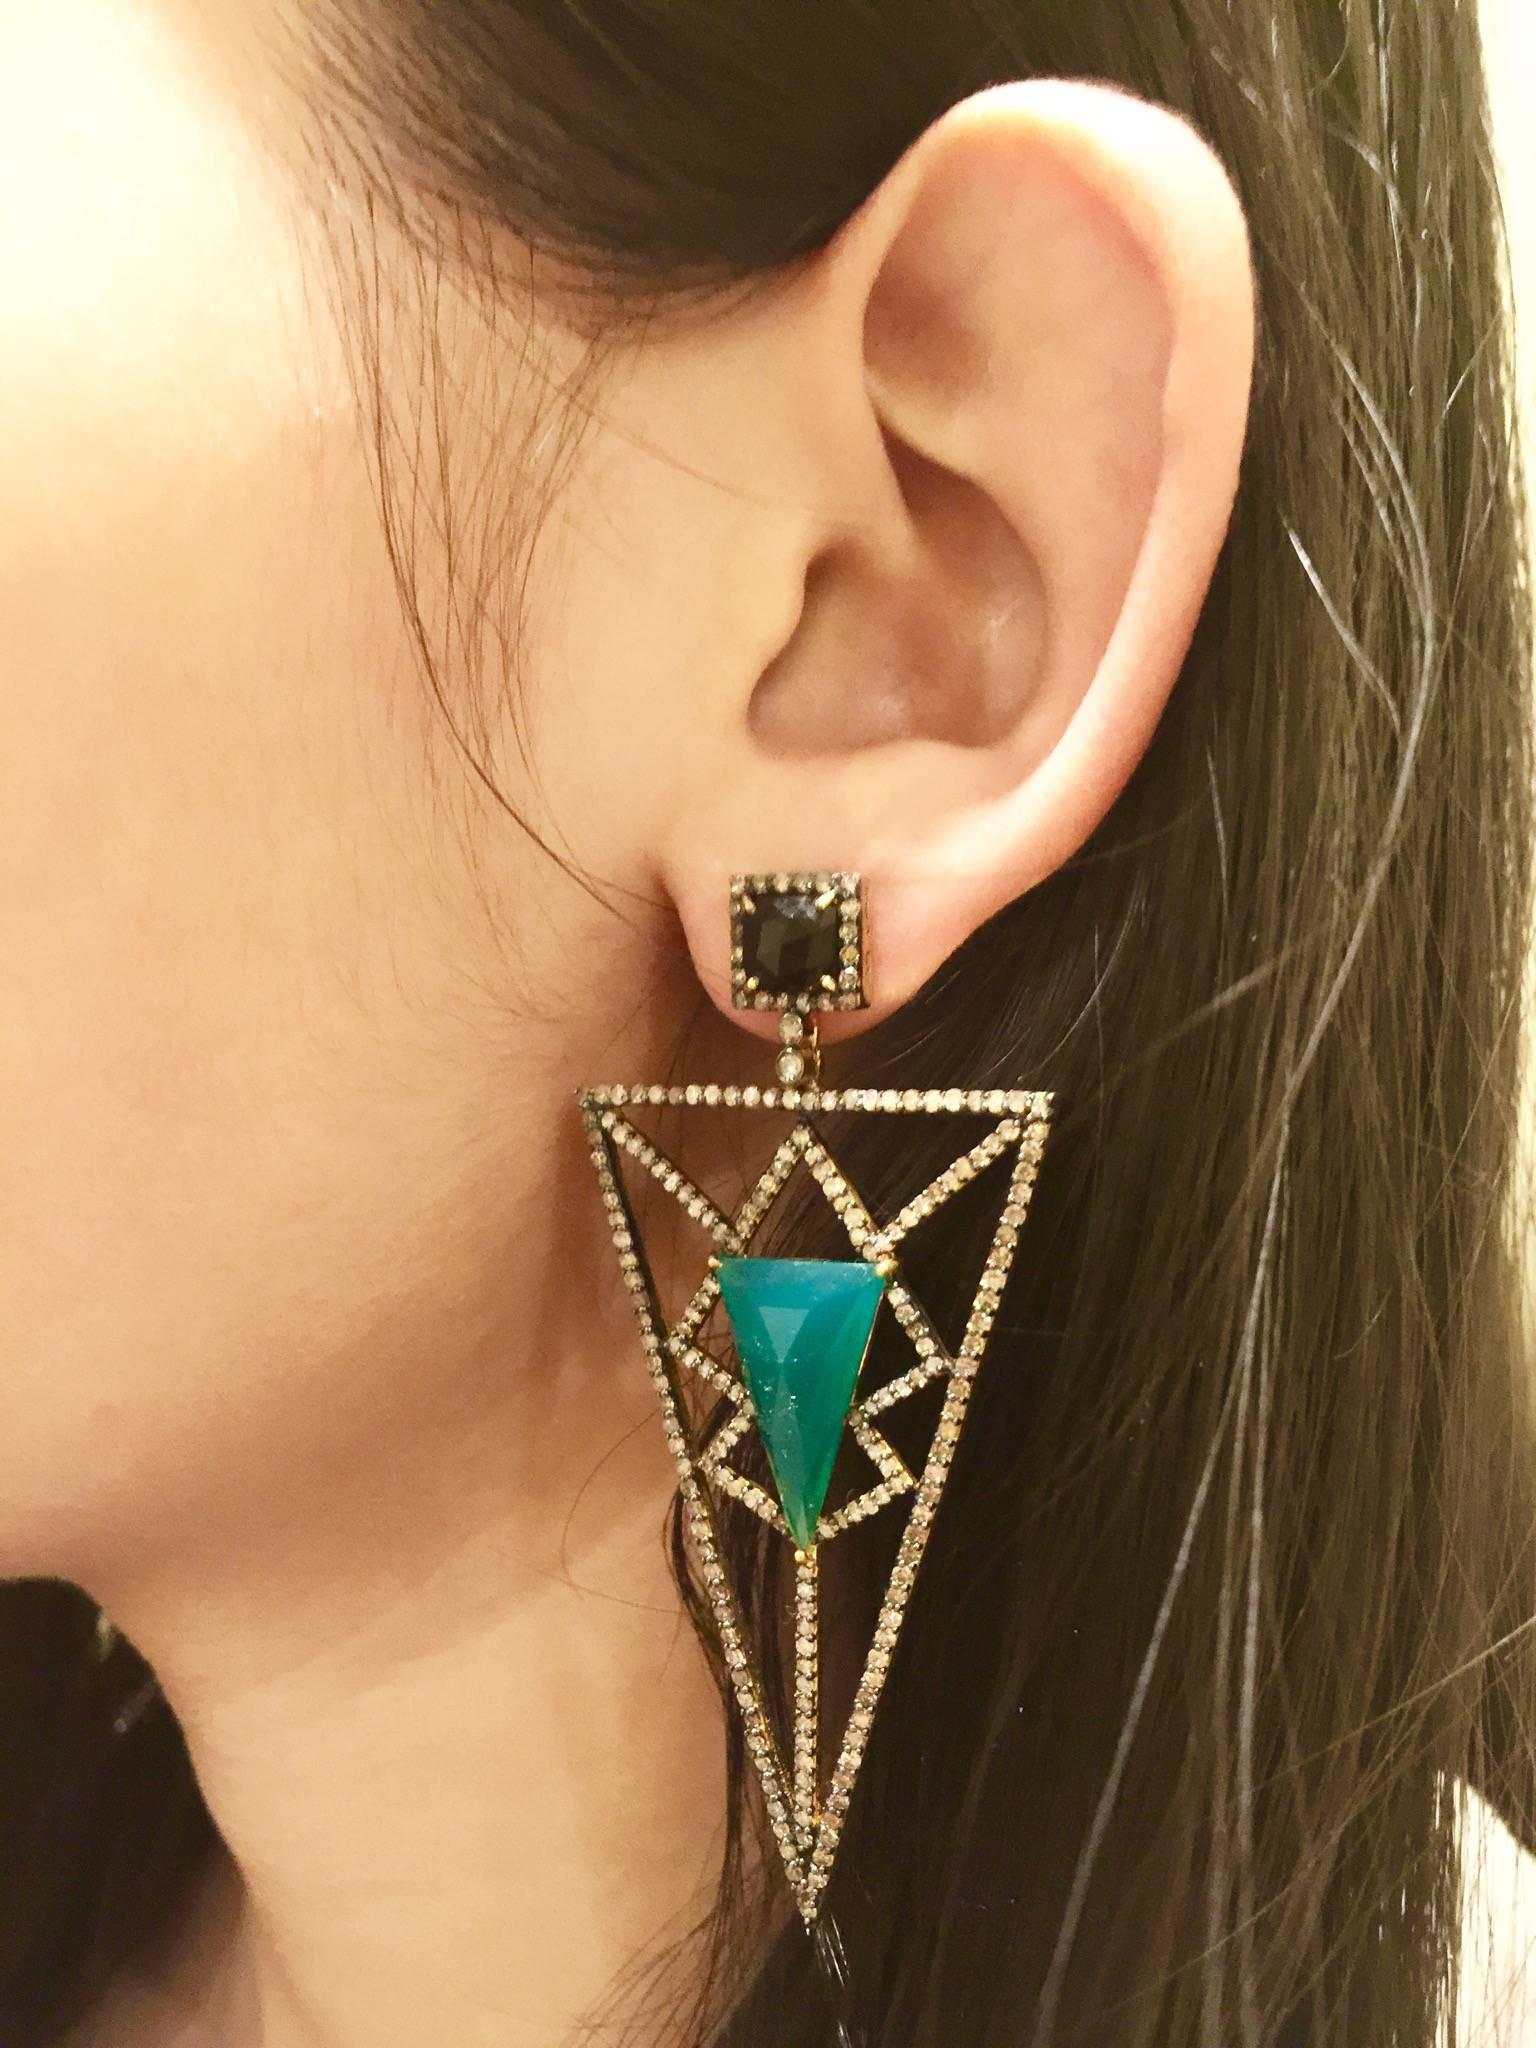 Part of our Bora Bora Collection, Pyramid earring is set with 3.82-carats of champagne diamonds. Expertly handcrafted from 18-karat gold, sterling silver and 8.60 carat green onyx.  Fun twist to fine jewelry, these gorgeous earrings can elevate any